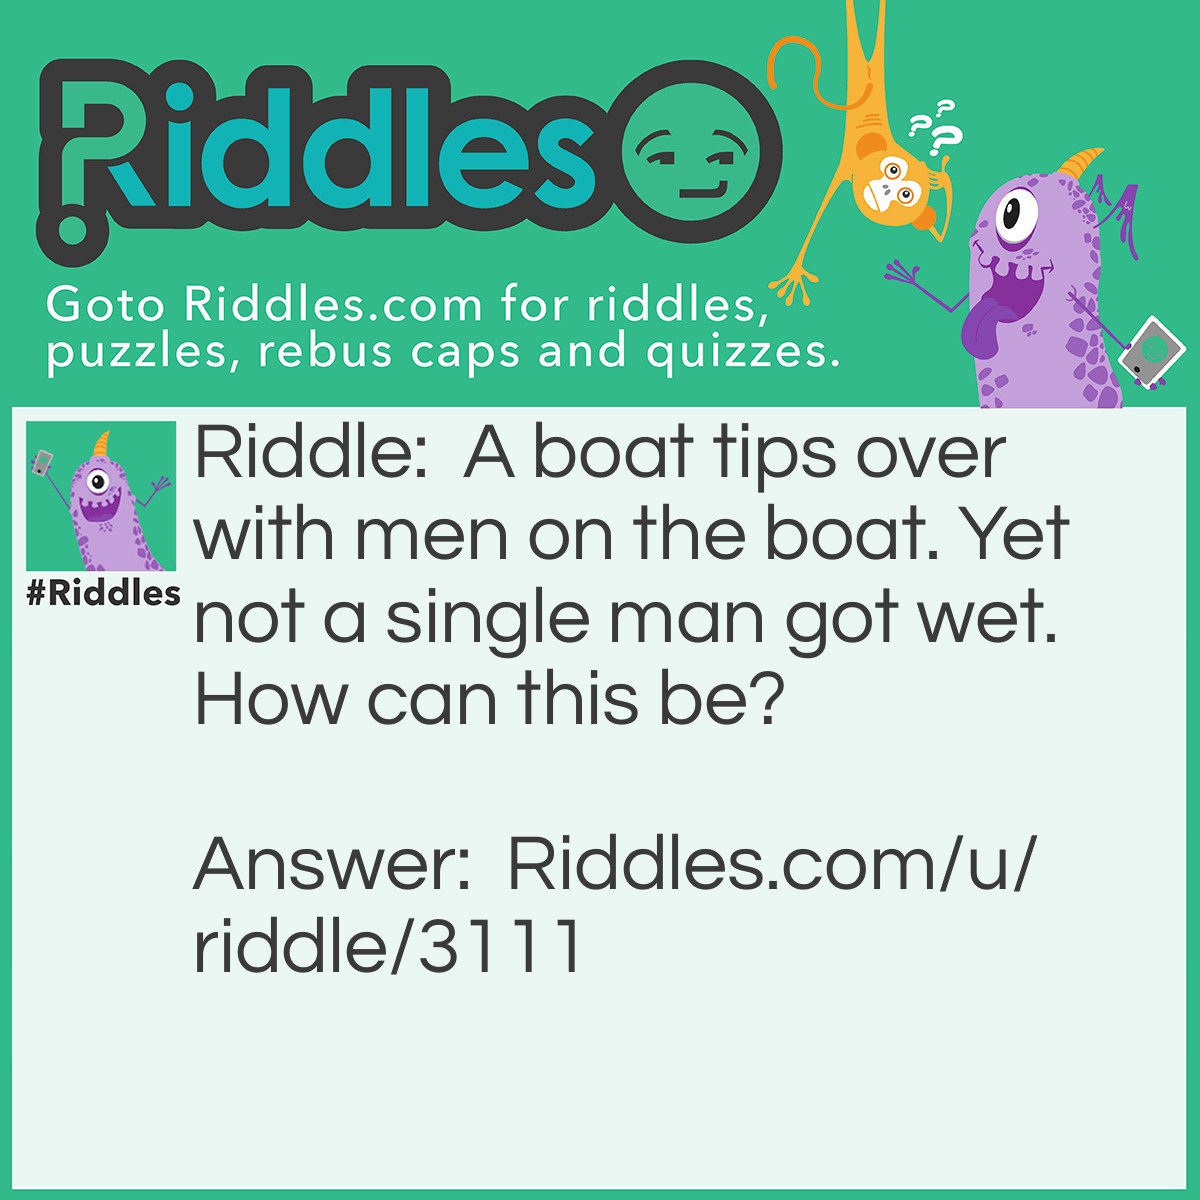 Riddle: A boat tips over with men on the boat. Yet not a single man got wet. How can this be? Answer: All of the men were married.